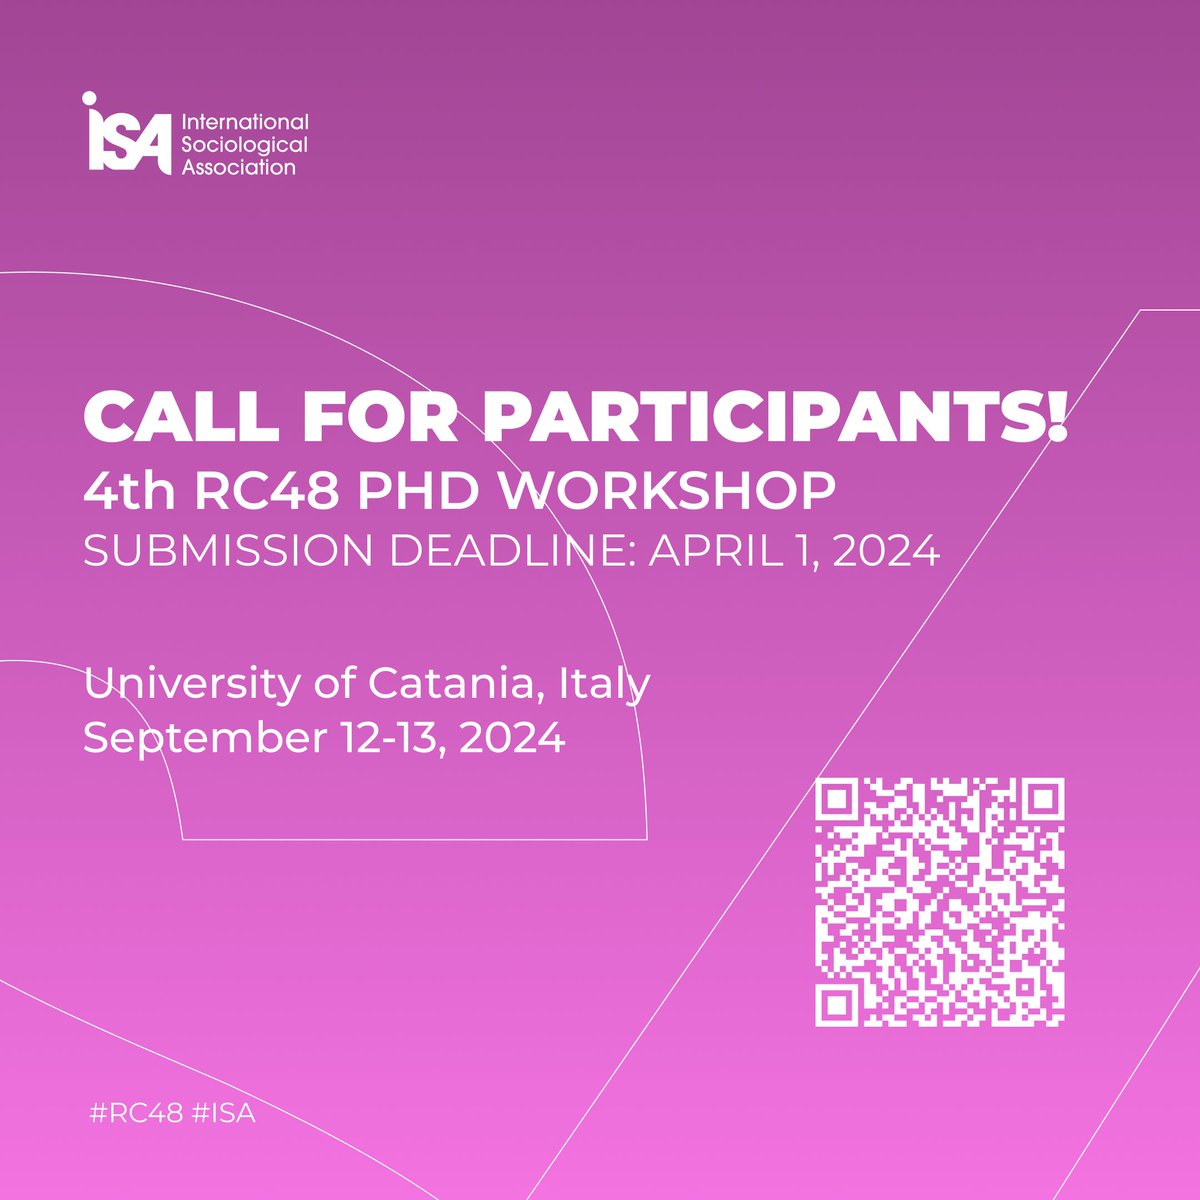 #CallforPapers 
DEADLINE IS APPROACHING SOON!

Doctoral students working in the field of social movements are invited to the 4th RC48 PhD Workshop at the University of Catania

When: September 12-13, 2024
Deadline for abstracts: April 1, 2024
More details: buff.ly/3HdId3j